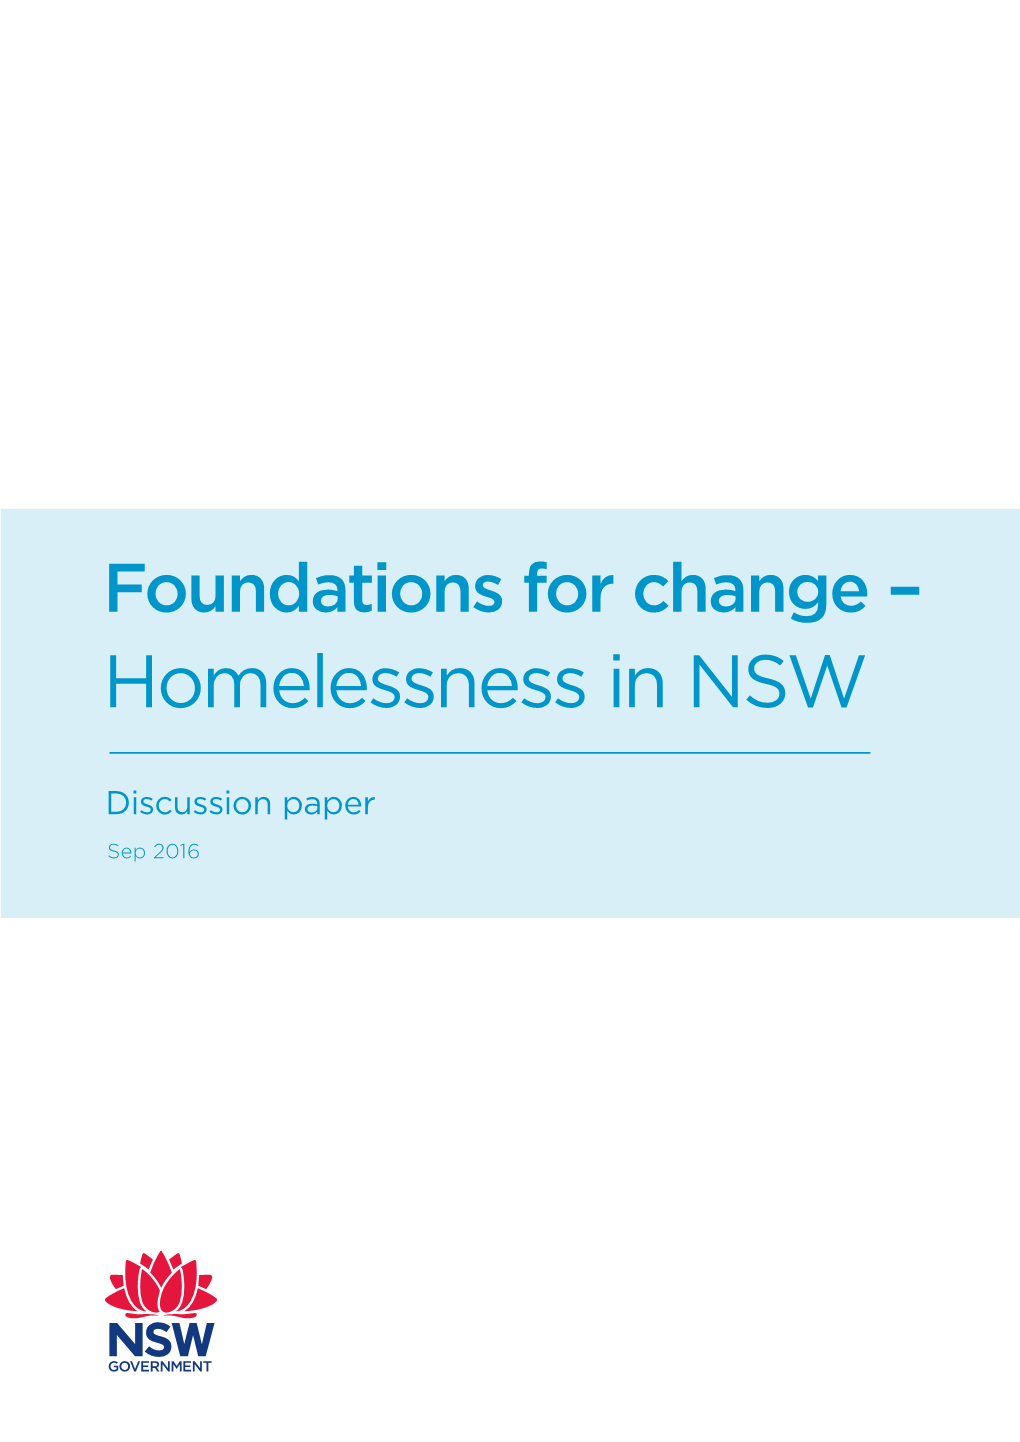 Foundations for Change – Homelessness in NSW